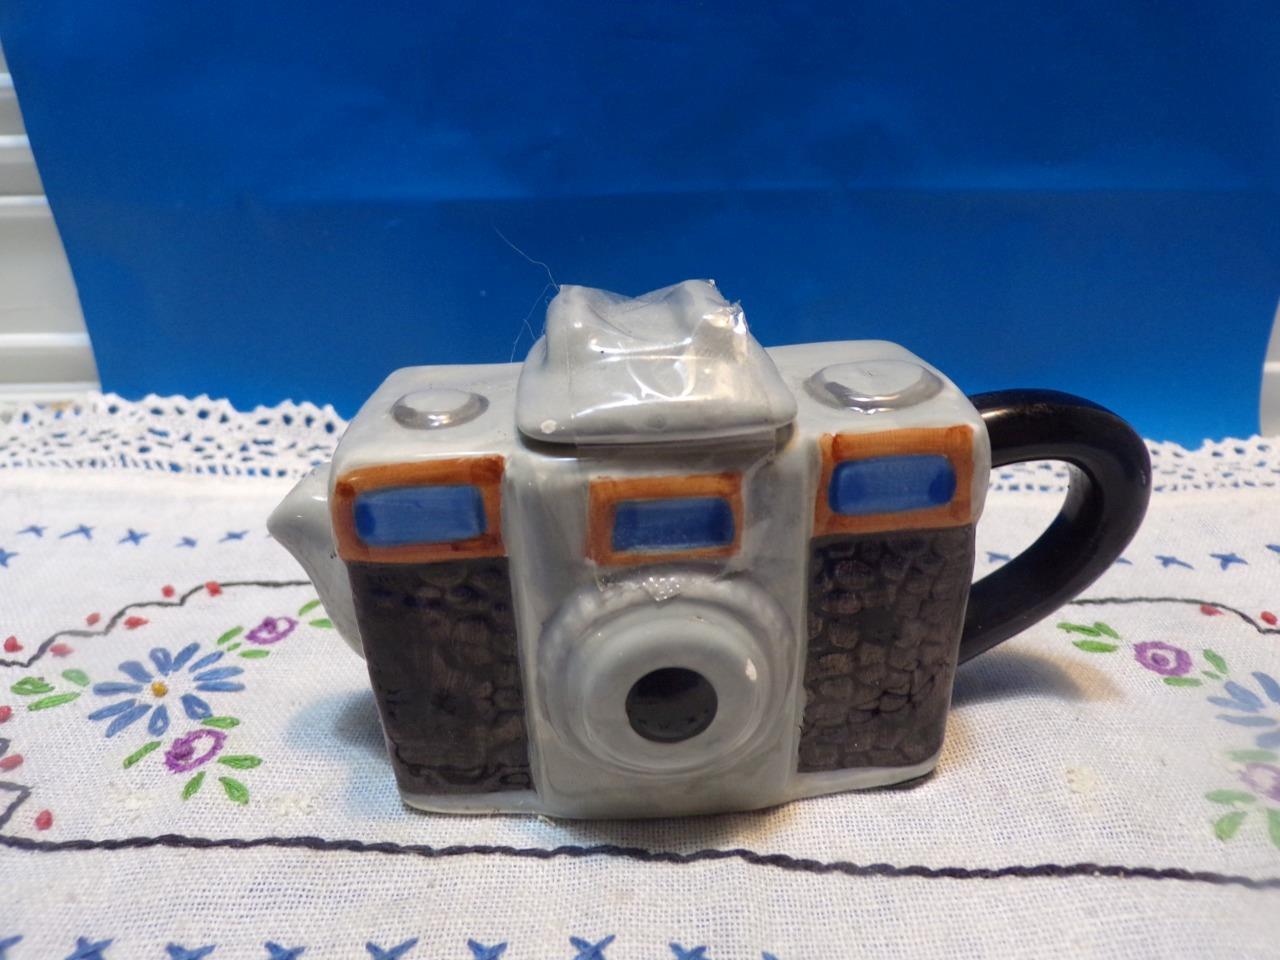 Vintage Camera One Cup Small Teapot or Creamer